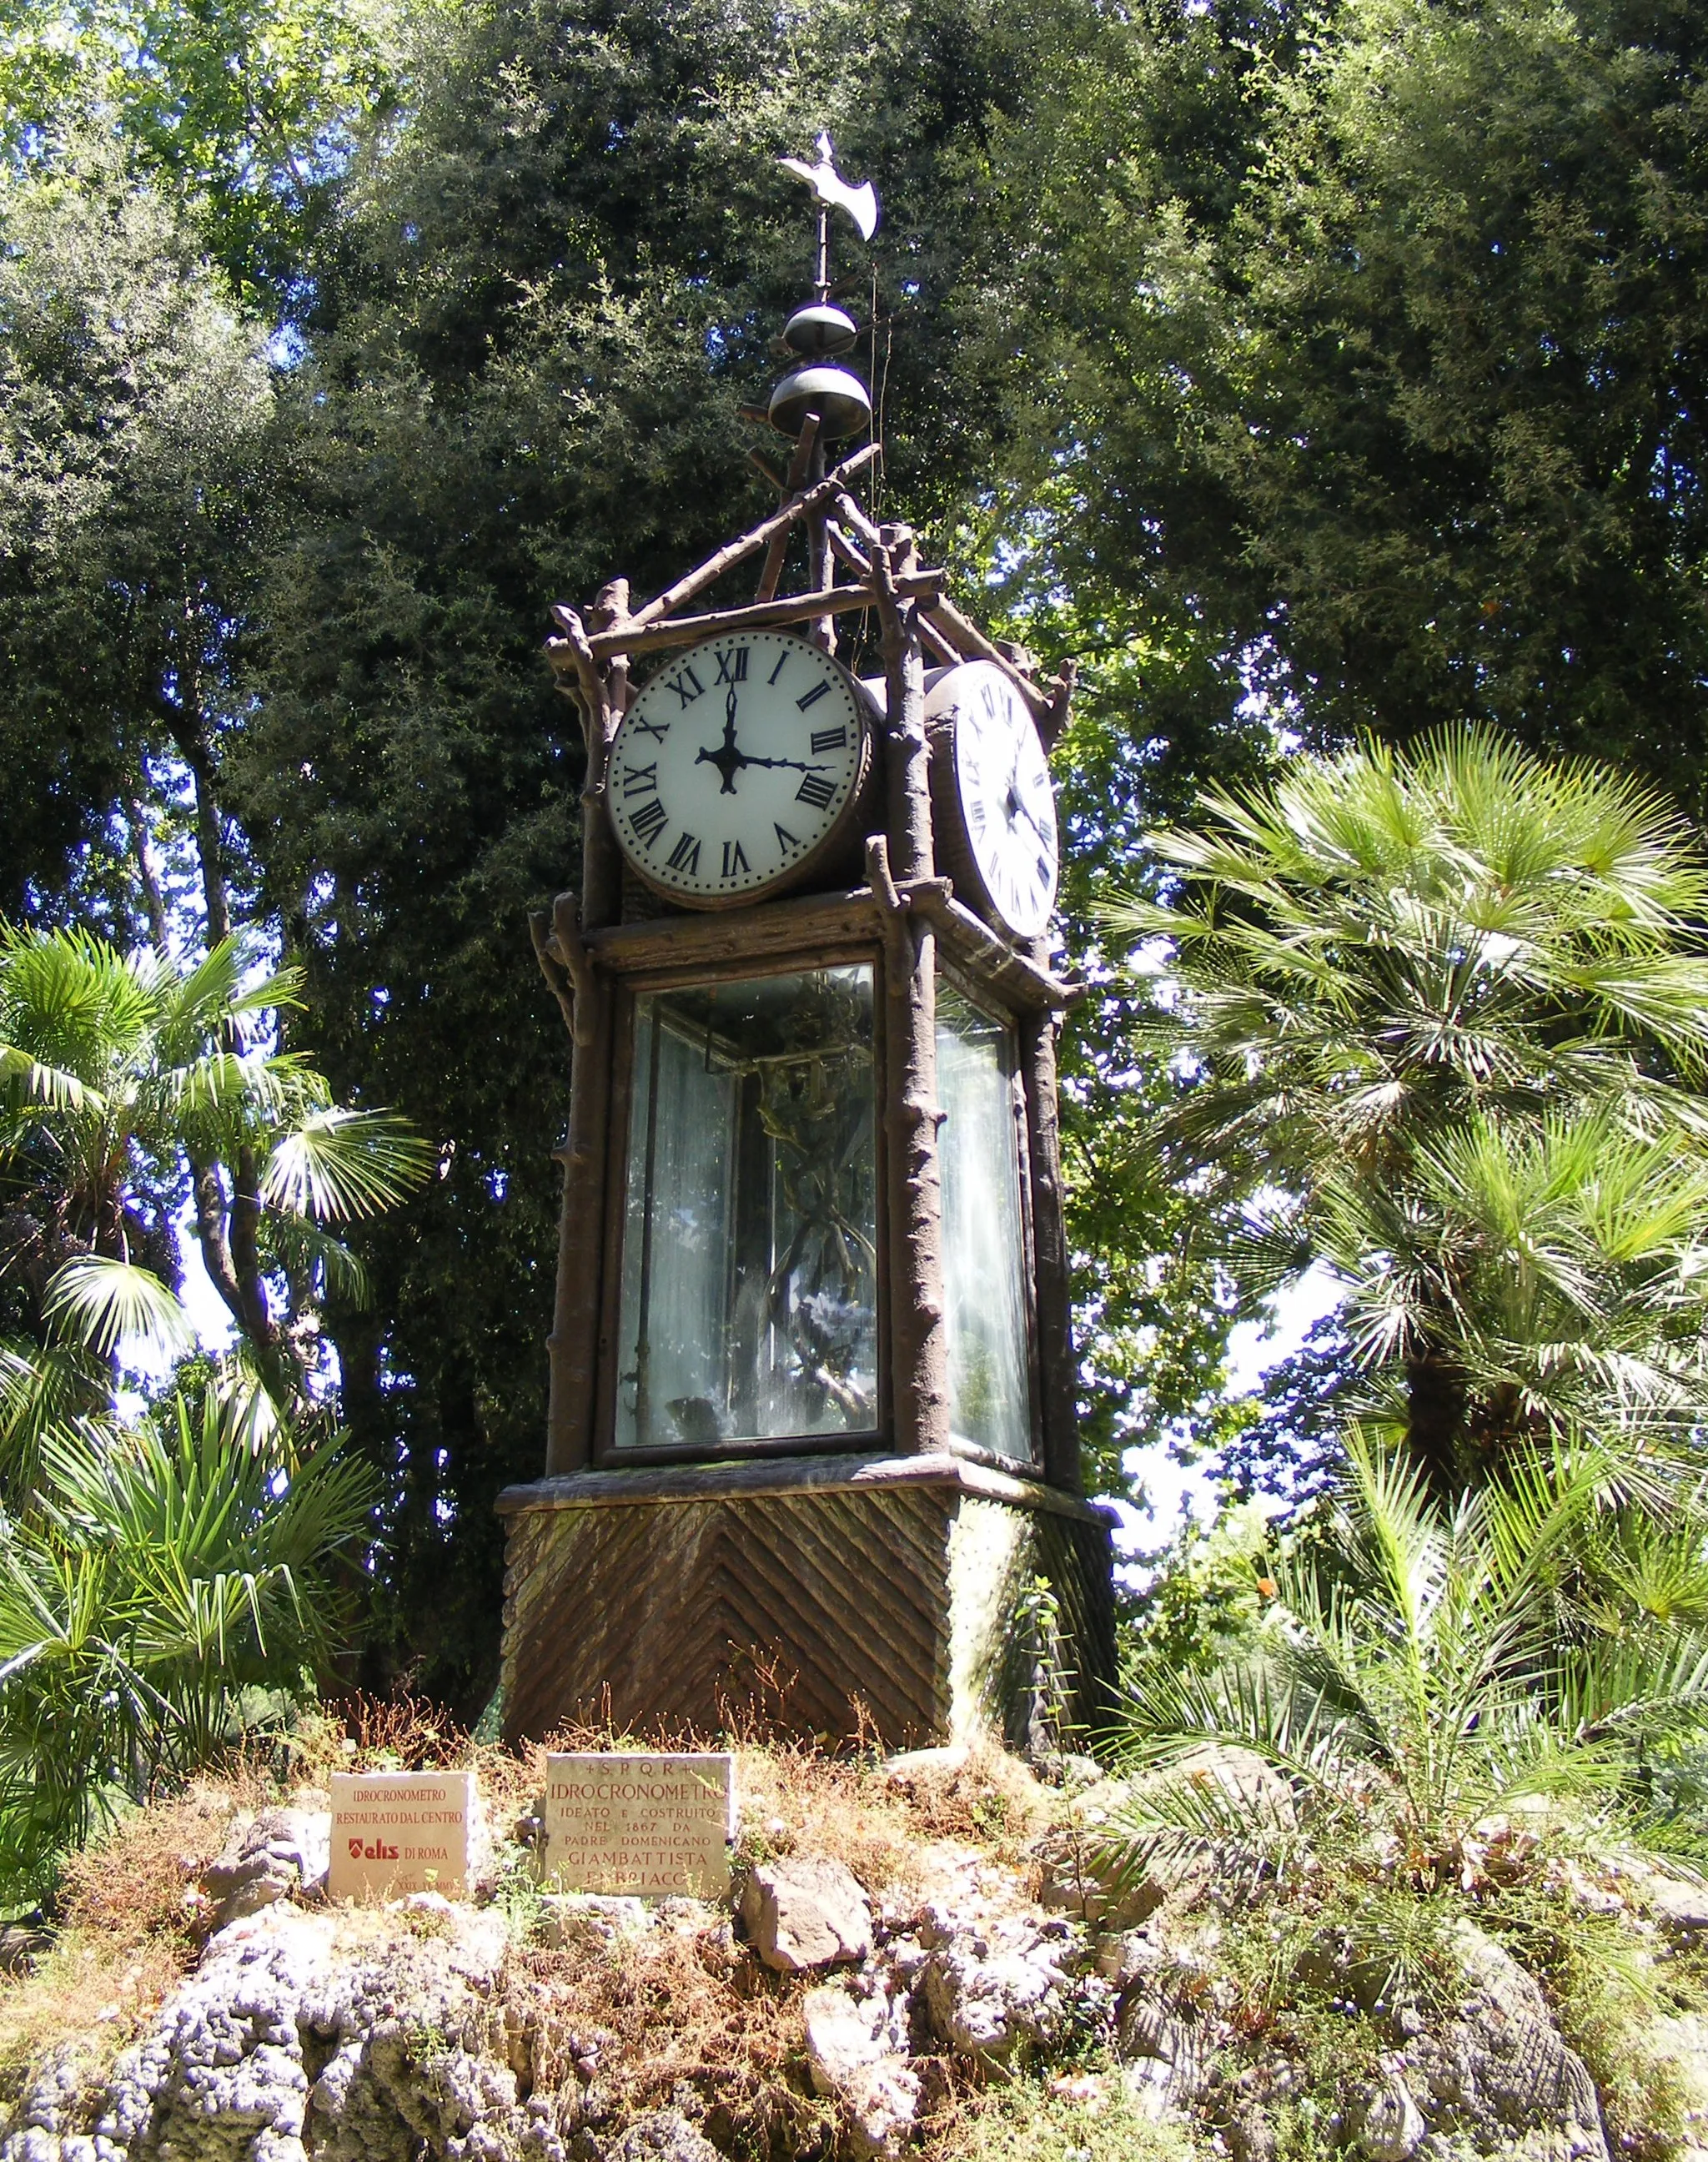 Photo showing: Hydrochronometer by Embriaco (total view with signs) at the Pincio hill